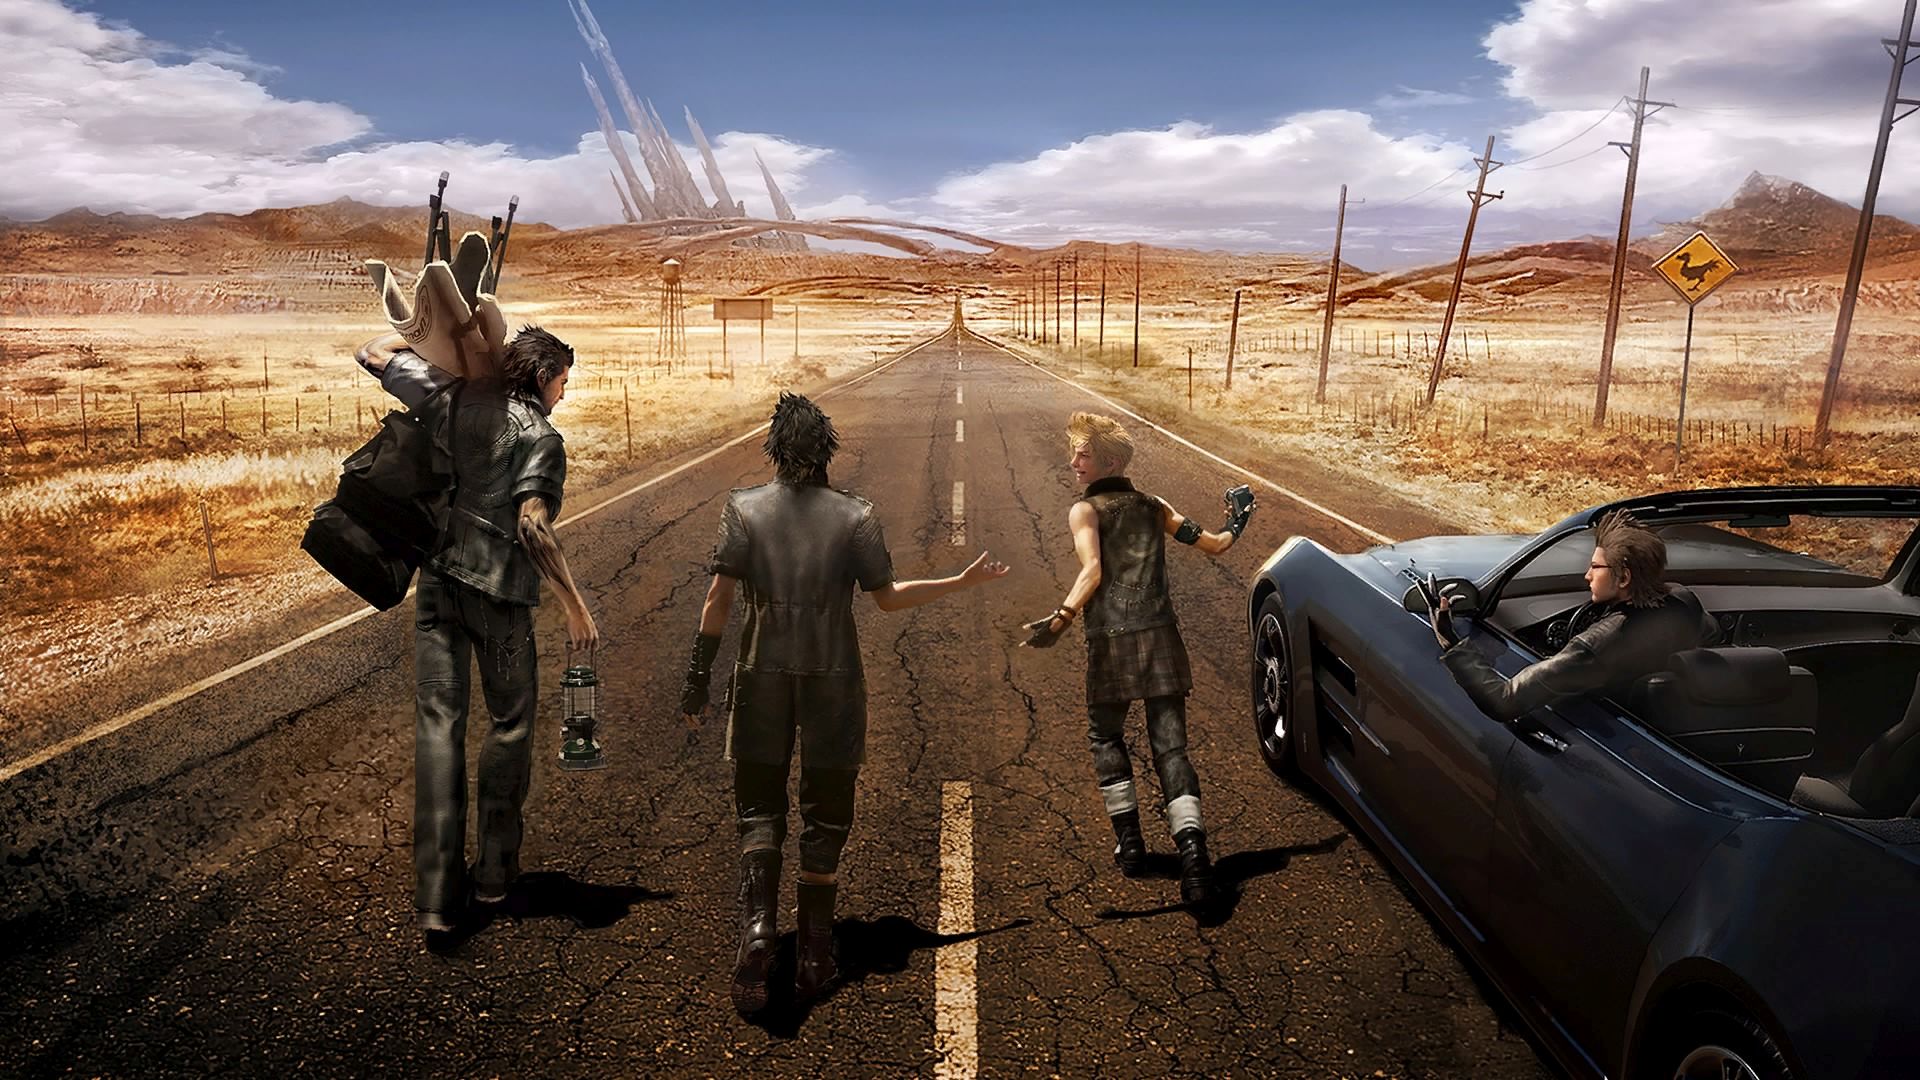 The Next Piece of Content For Final Fantasy XV Will Be A Book - mxdwn Games